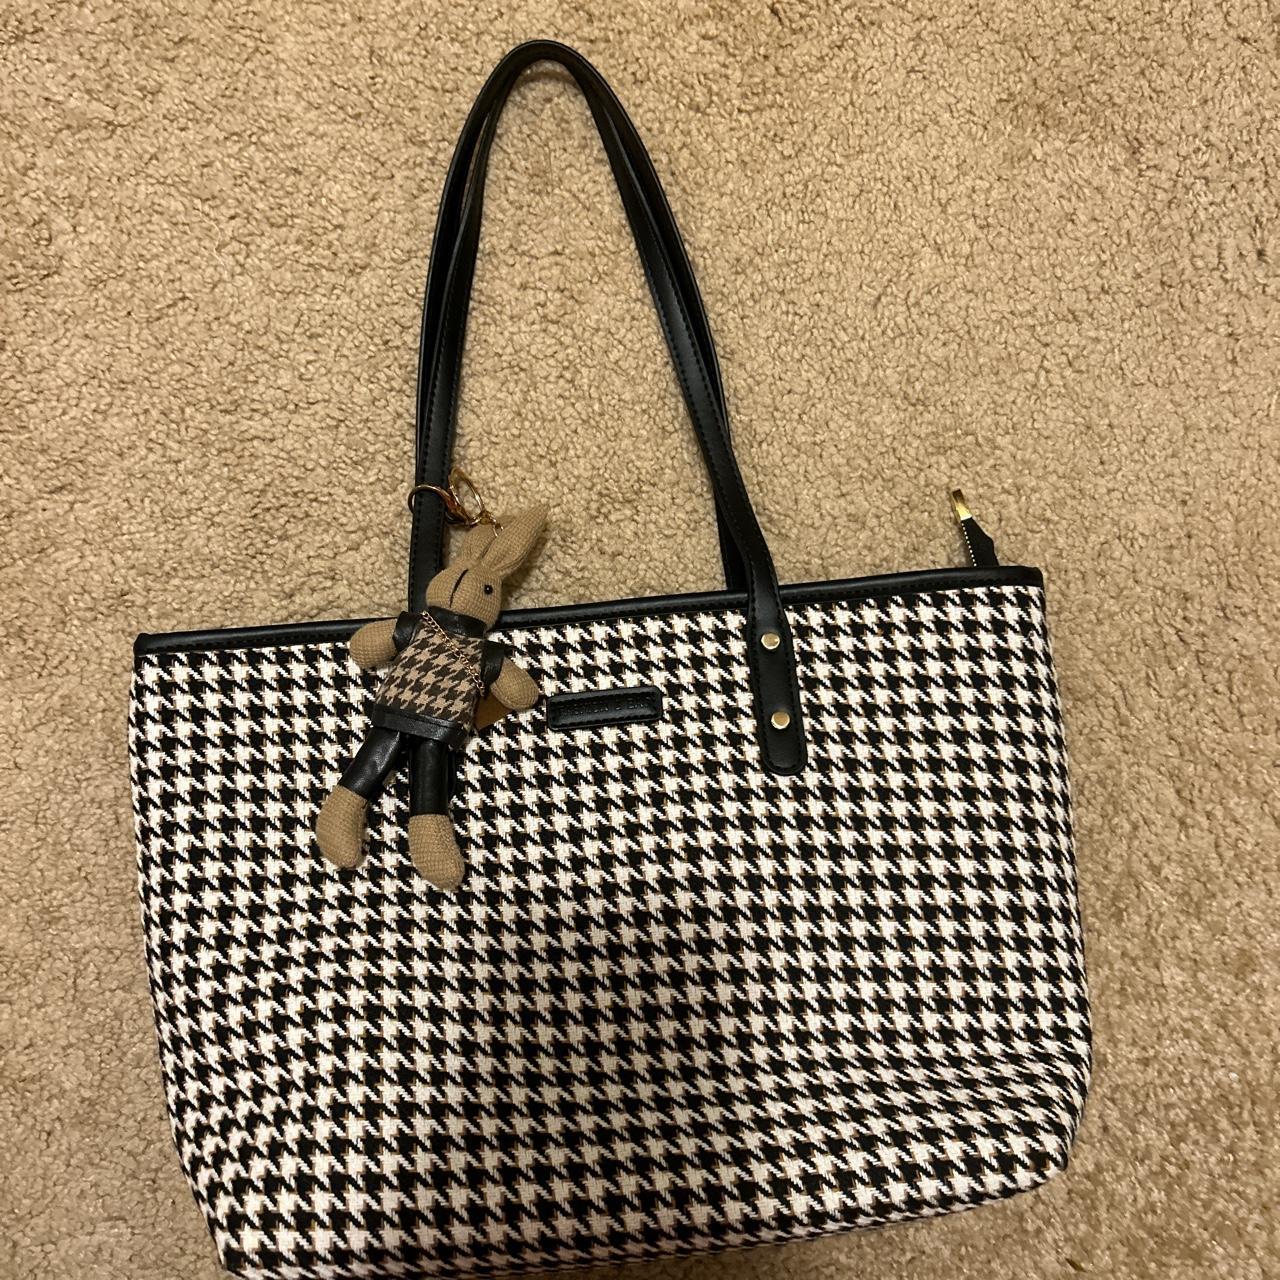 Guess Gingham Black and White Checkered Hand Bag Purse | eBay